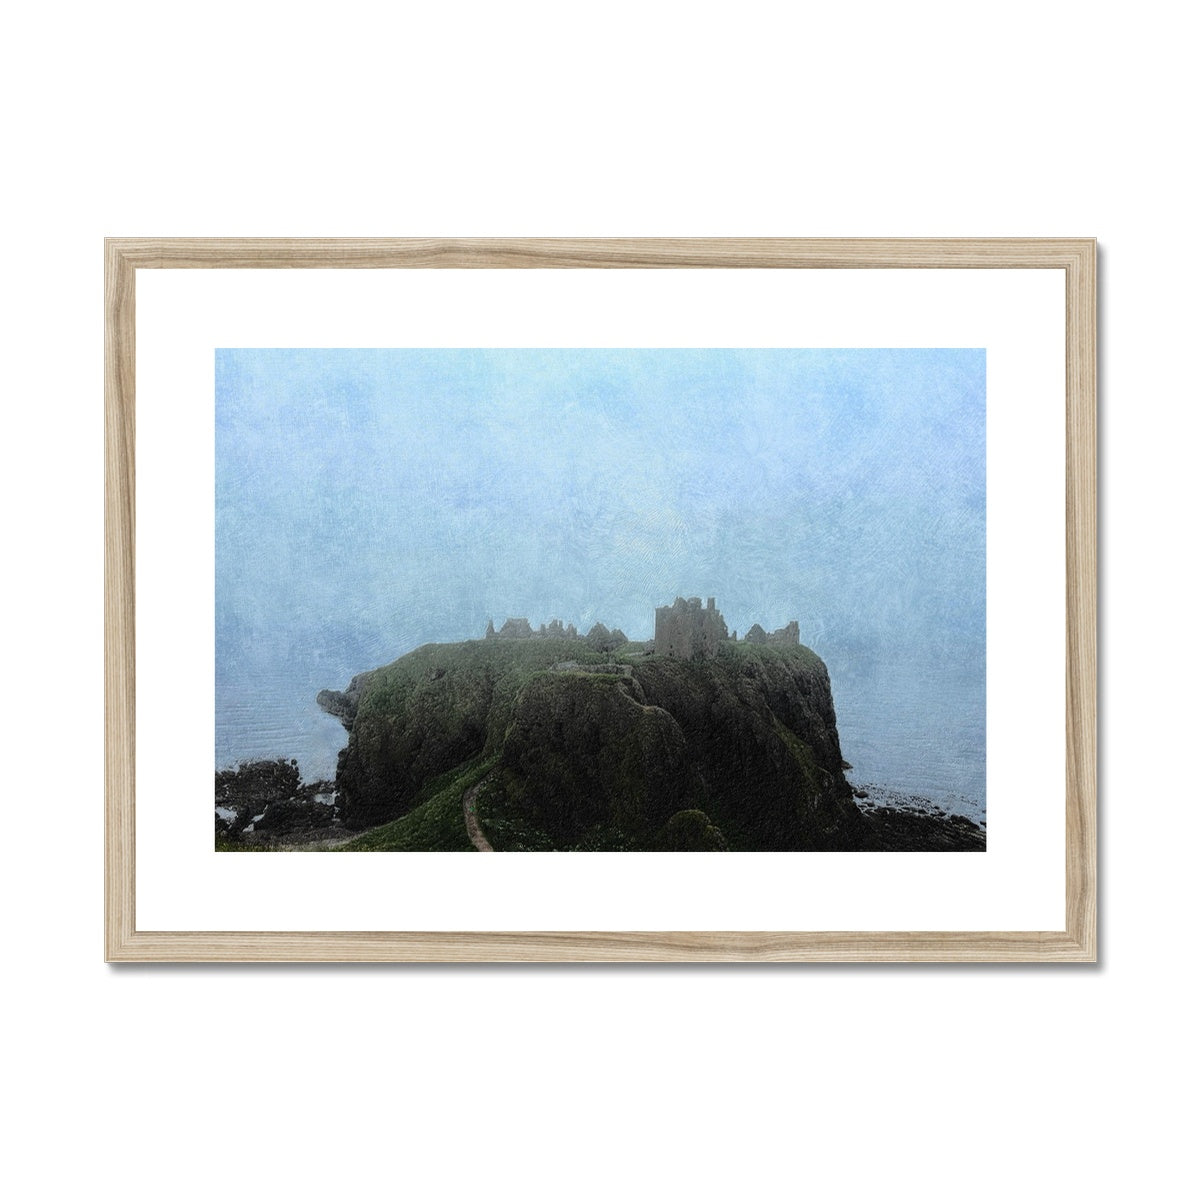 Dunnottar Castle Mist Painting | Framed & Mounted Prints From Scotland-Framed & Mounted Prints-Historic & Iconic Scotland Art Gallery-A2 Landscape-Natural Frame-Paintings, Prints, Homeware, Art Gifts From Scotland By Scottish Artist Kevin Hunter